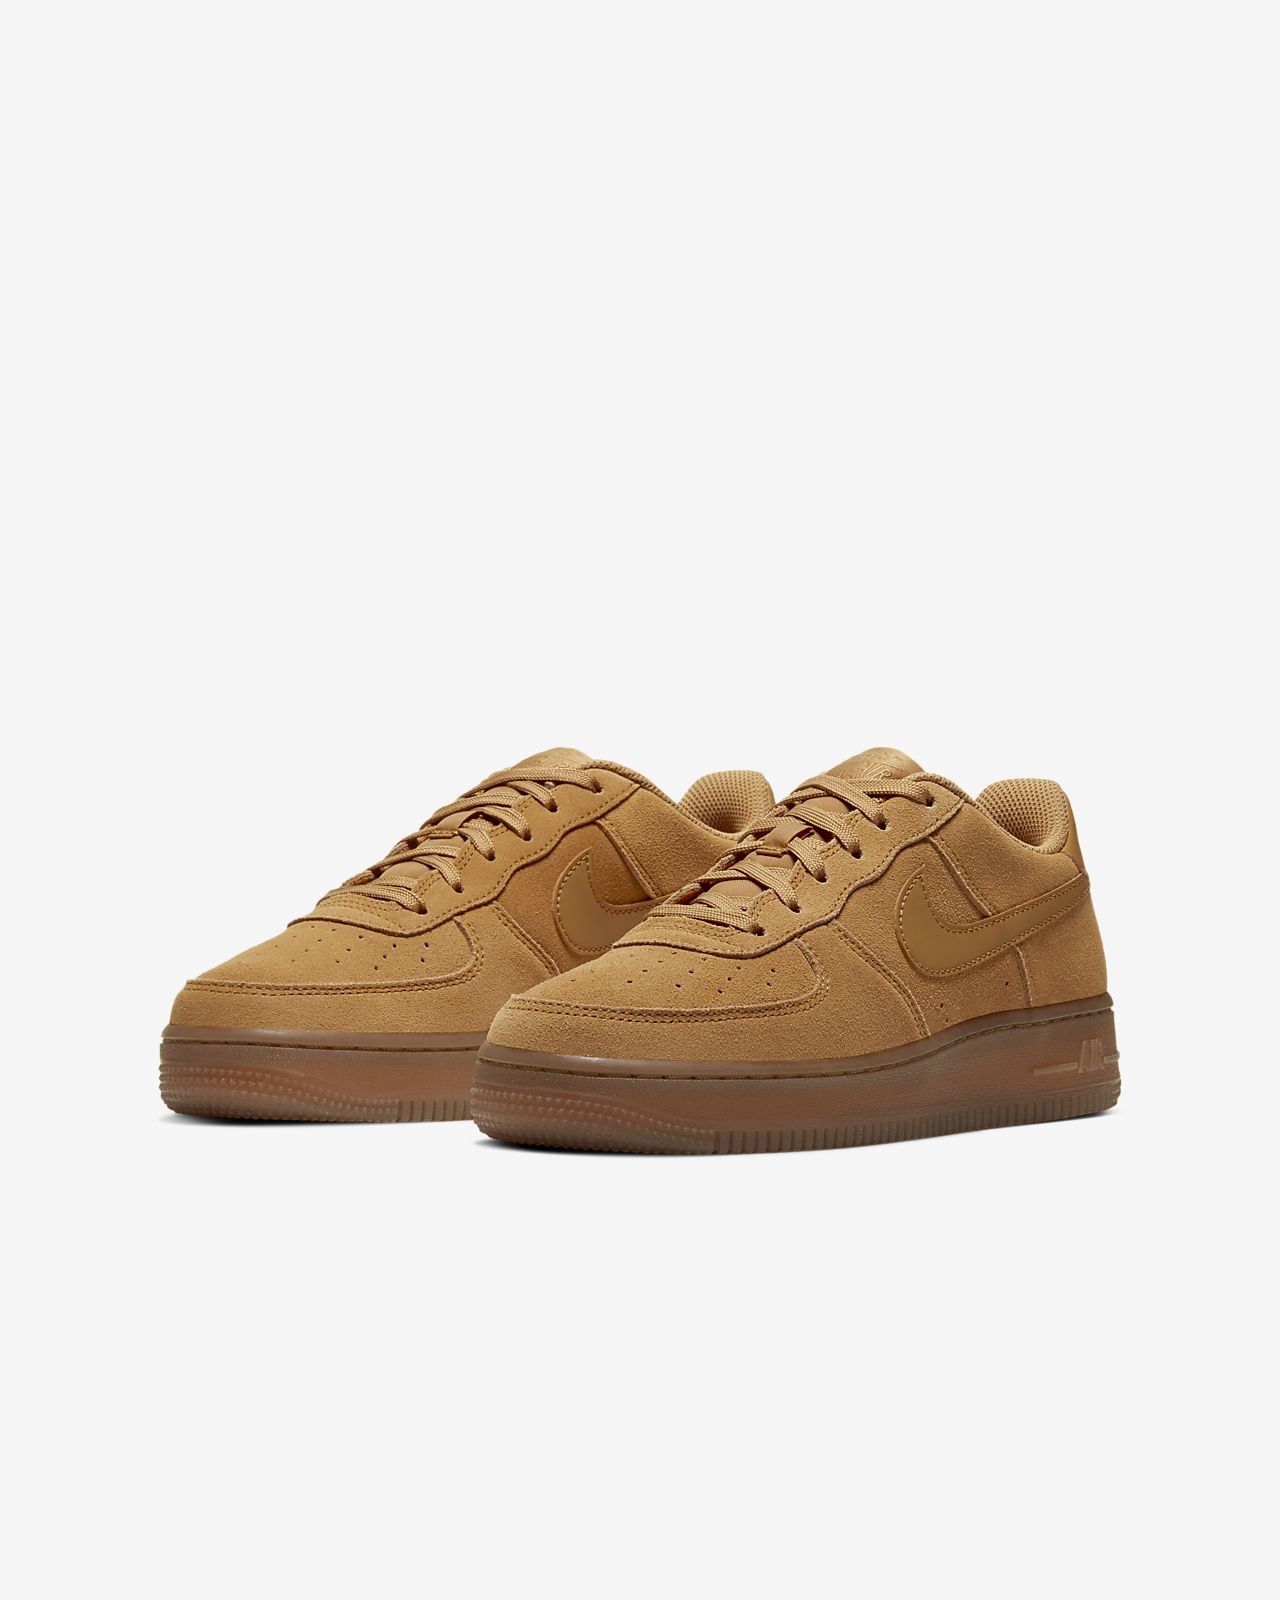 air force one schuh